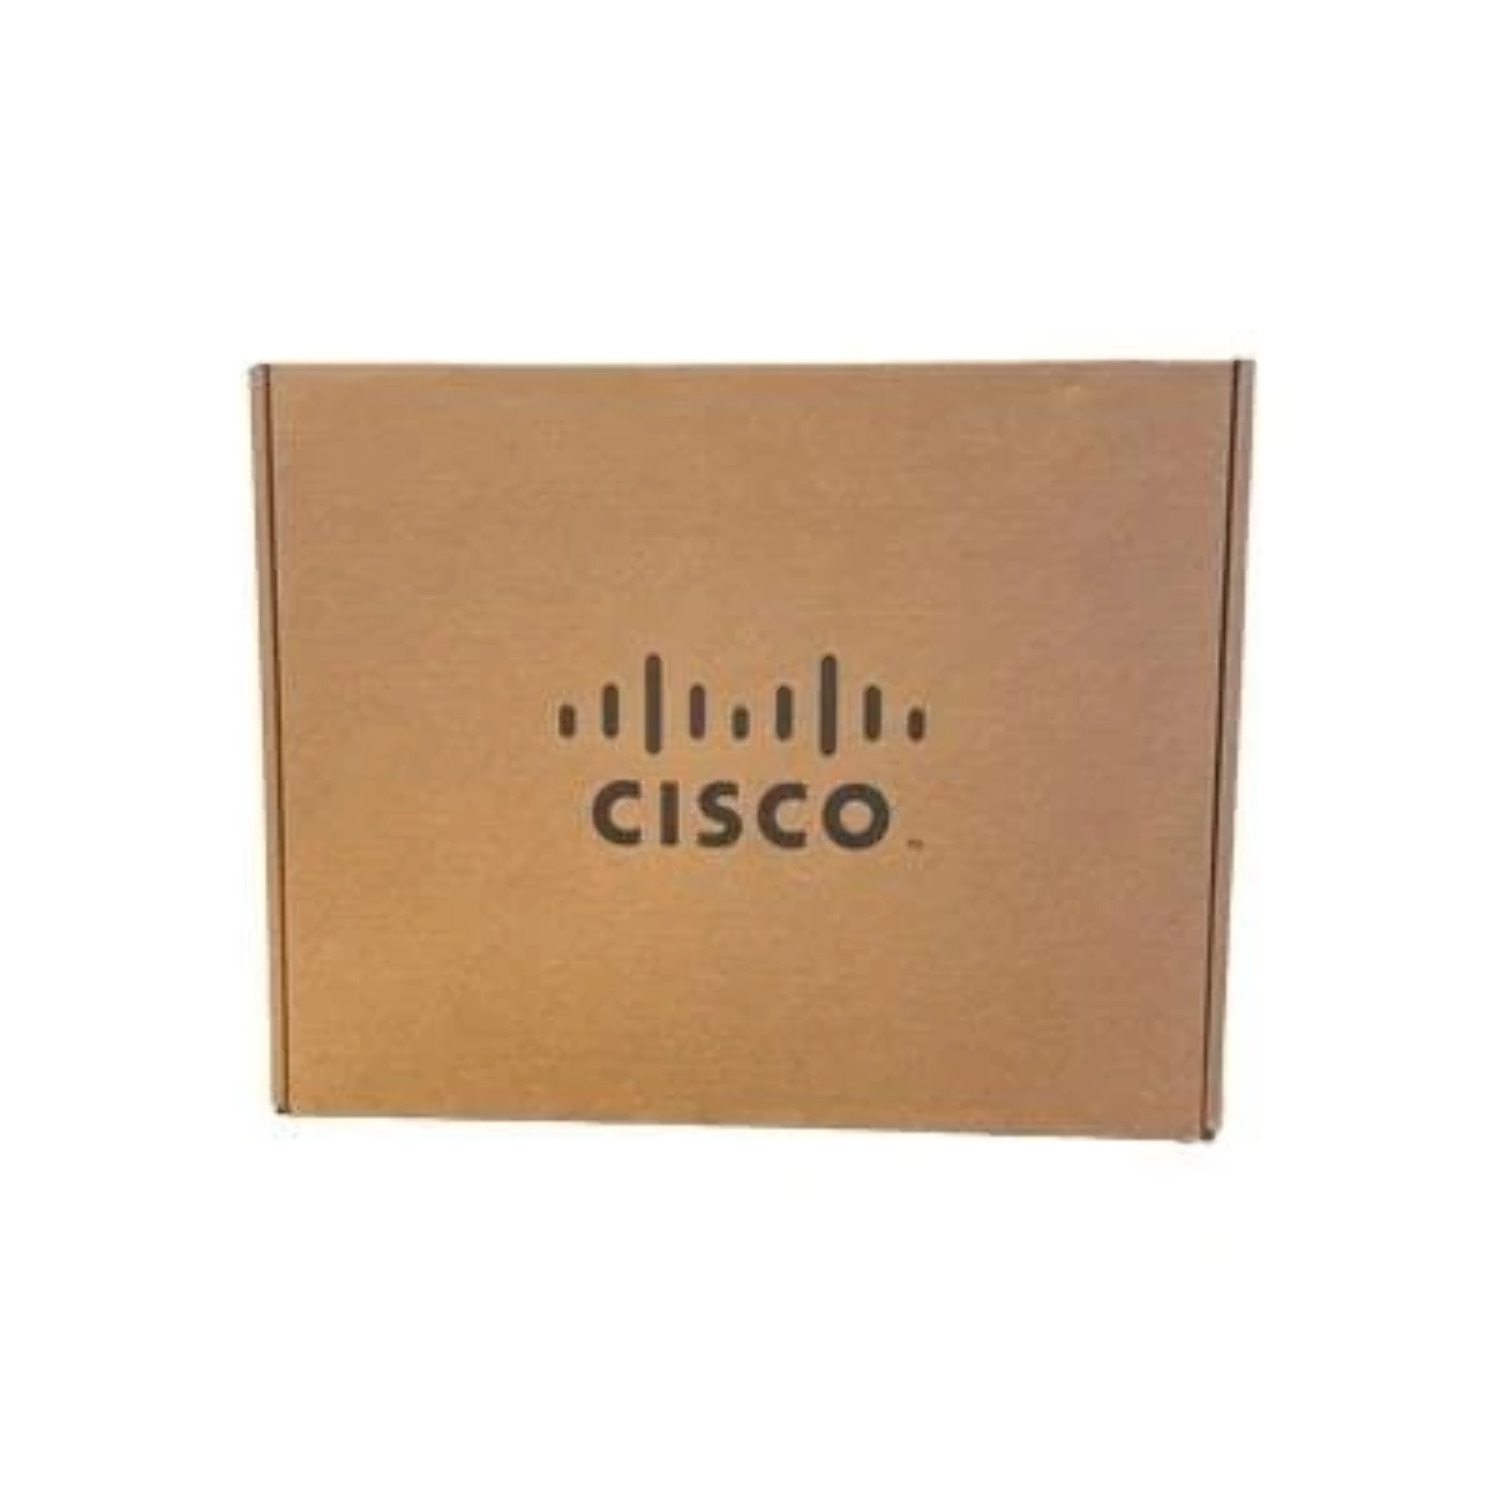 Cisco Small Business 500 Series Switch (SF500-48P-K9-G5-WS) - image 1 of 1